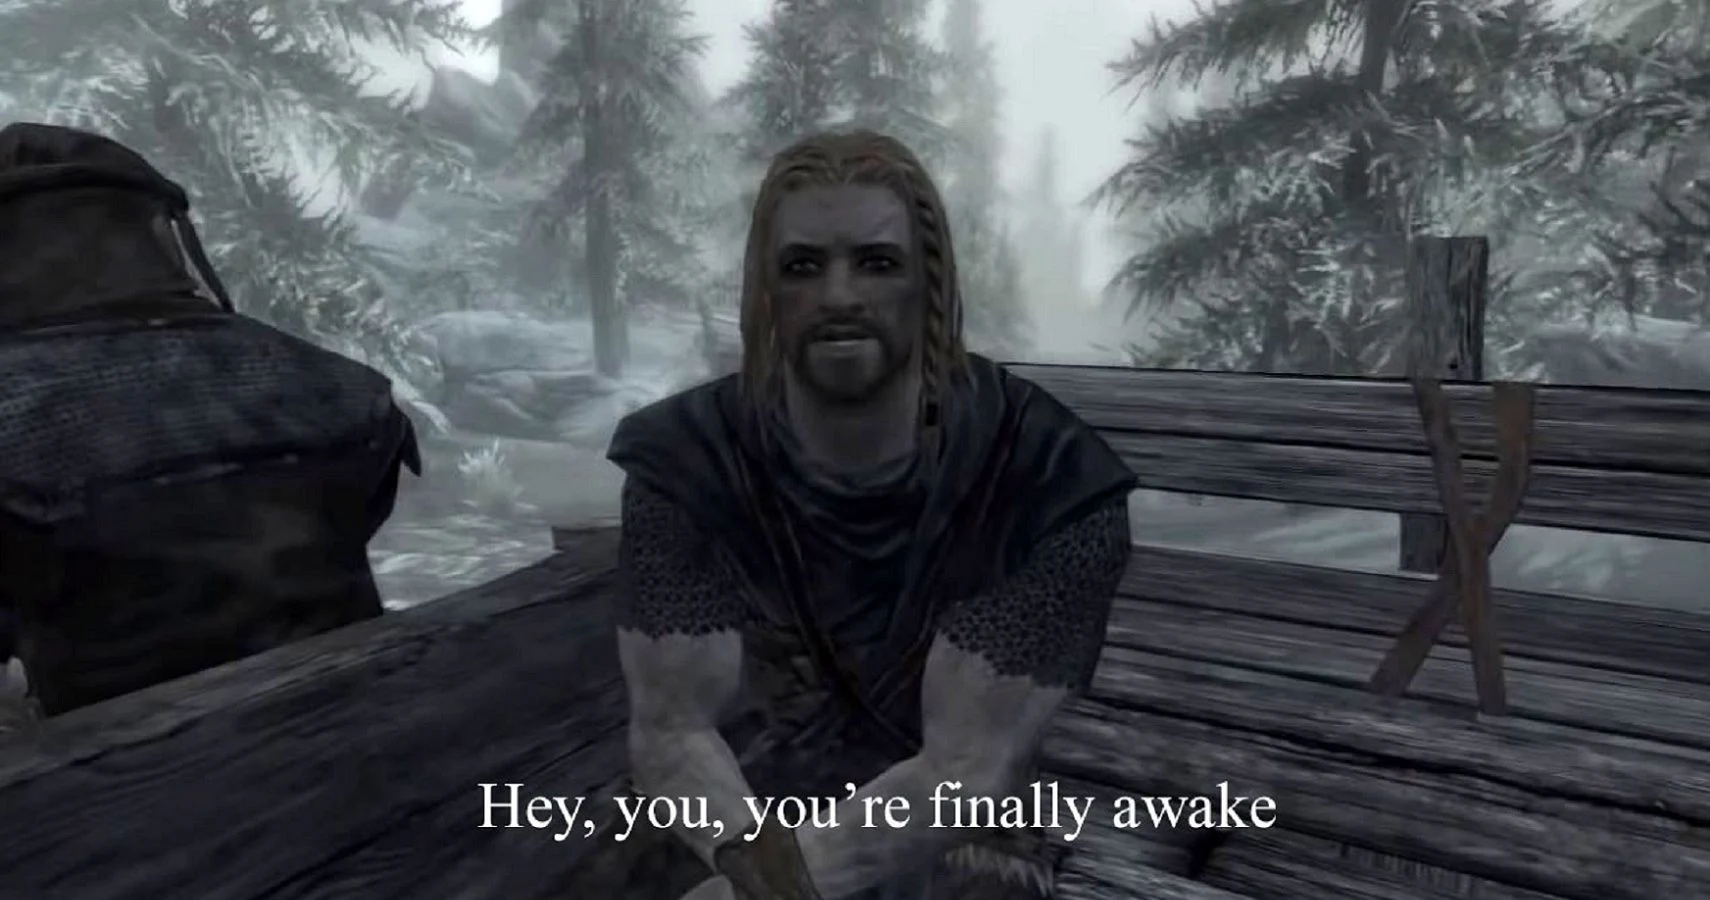 No "your finally awake" memes have been featured yet. 